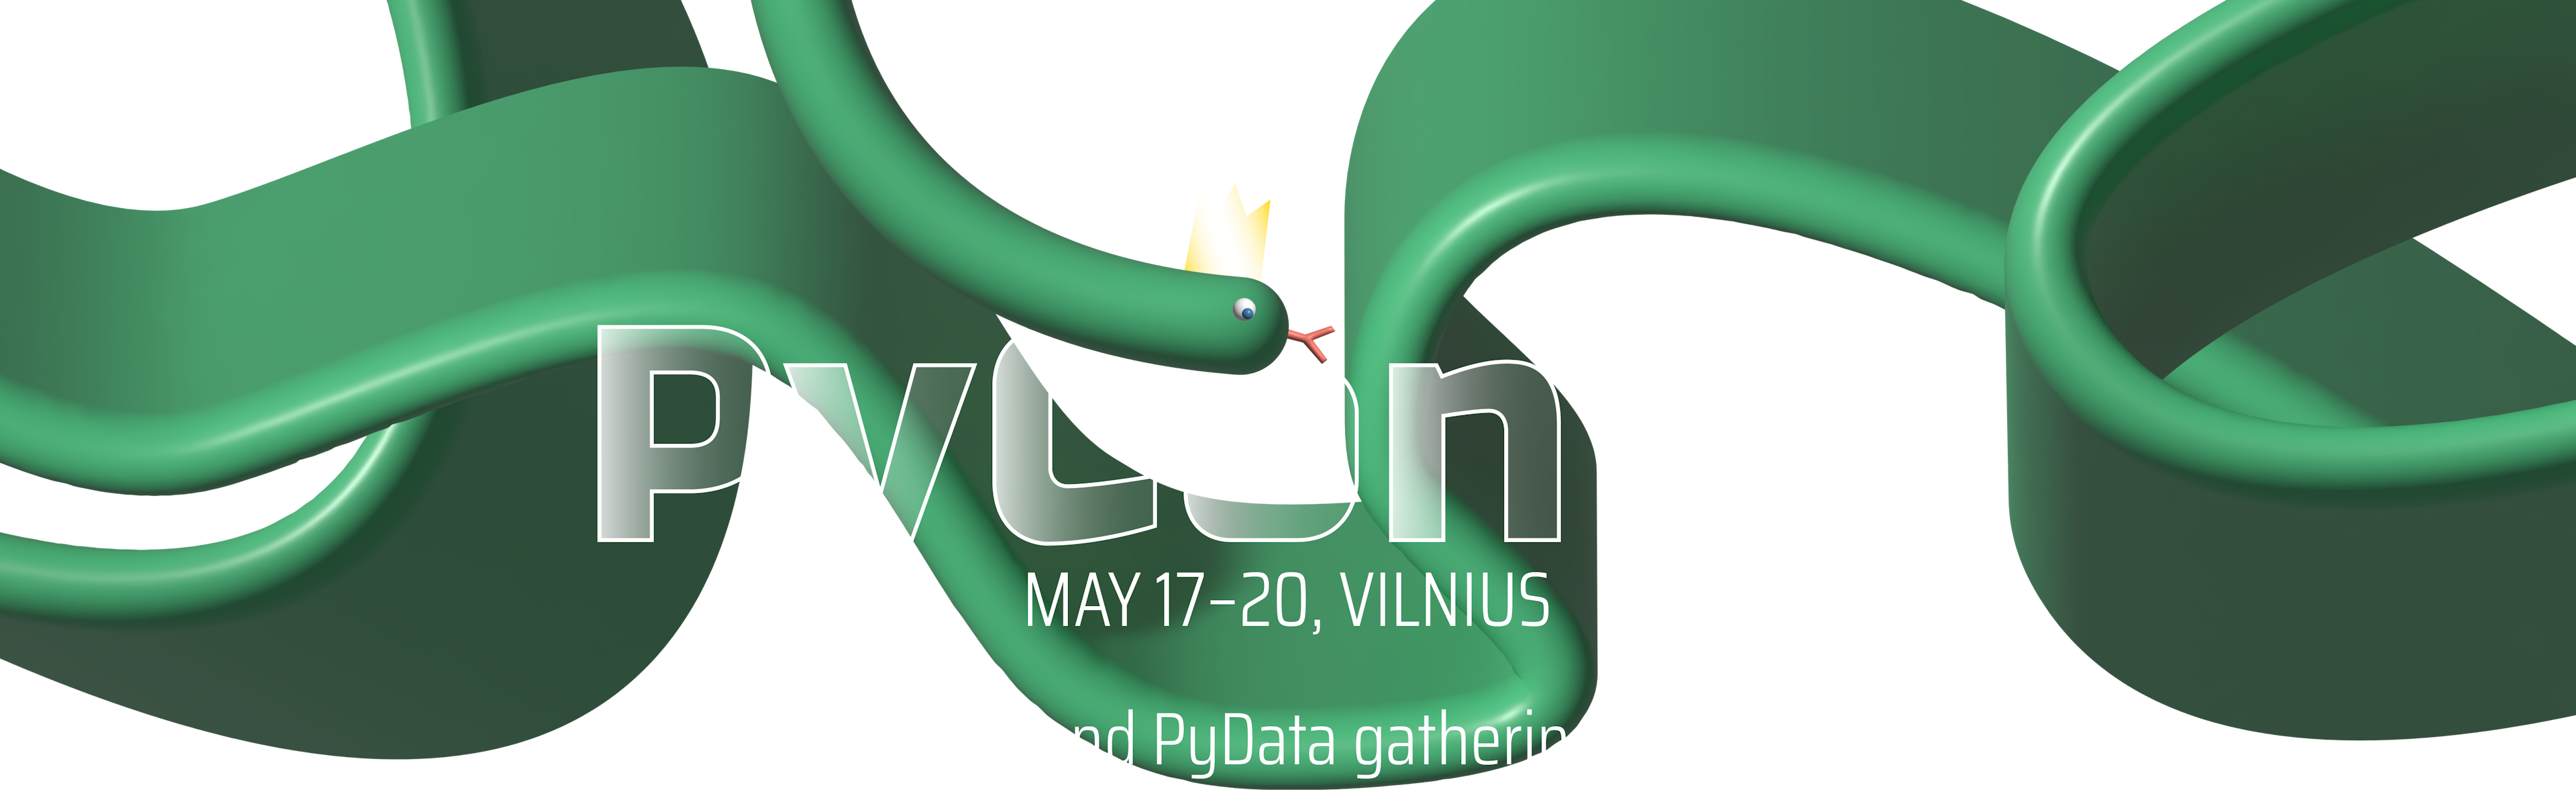 PyCon LT May 17-22, Vilnius Biggest Python and PyData gathering in the Baltics